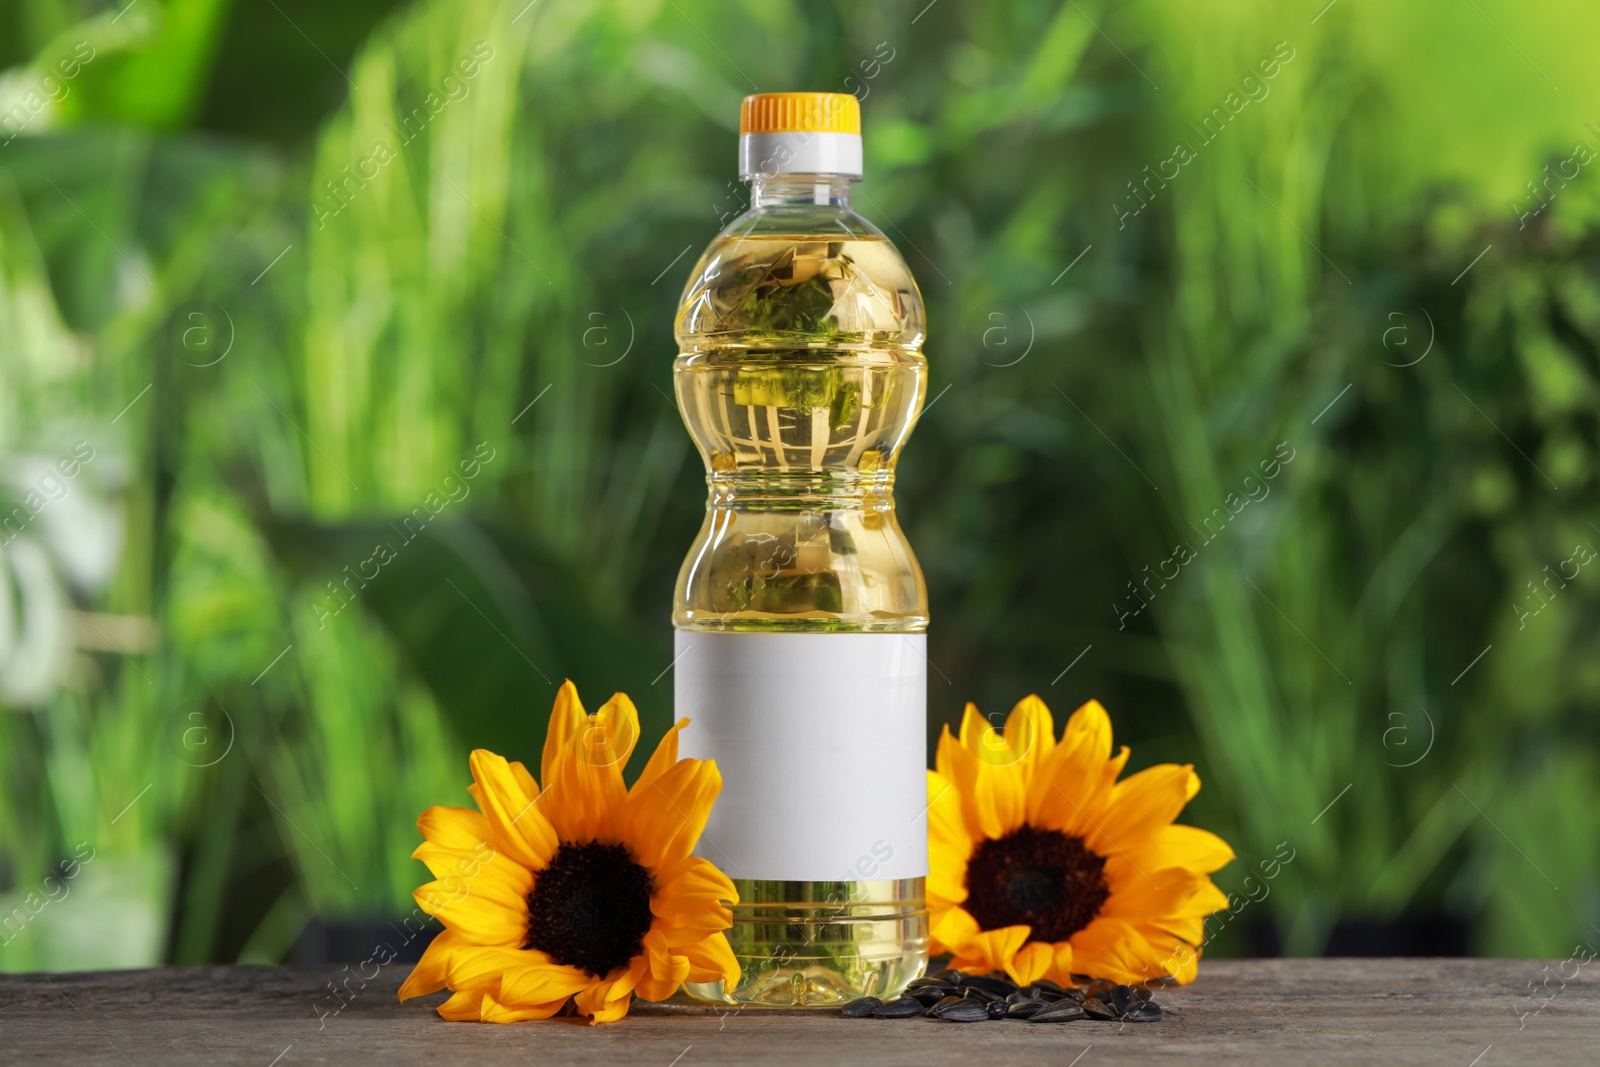 Photo of Bottle of cooking oil, sunflowers and seeds on wooden table against blurred background